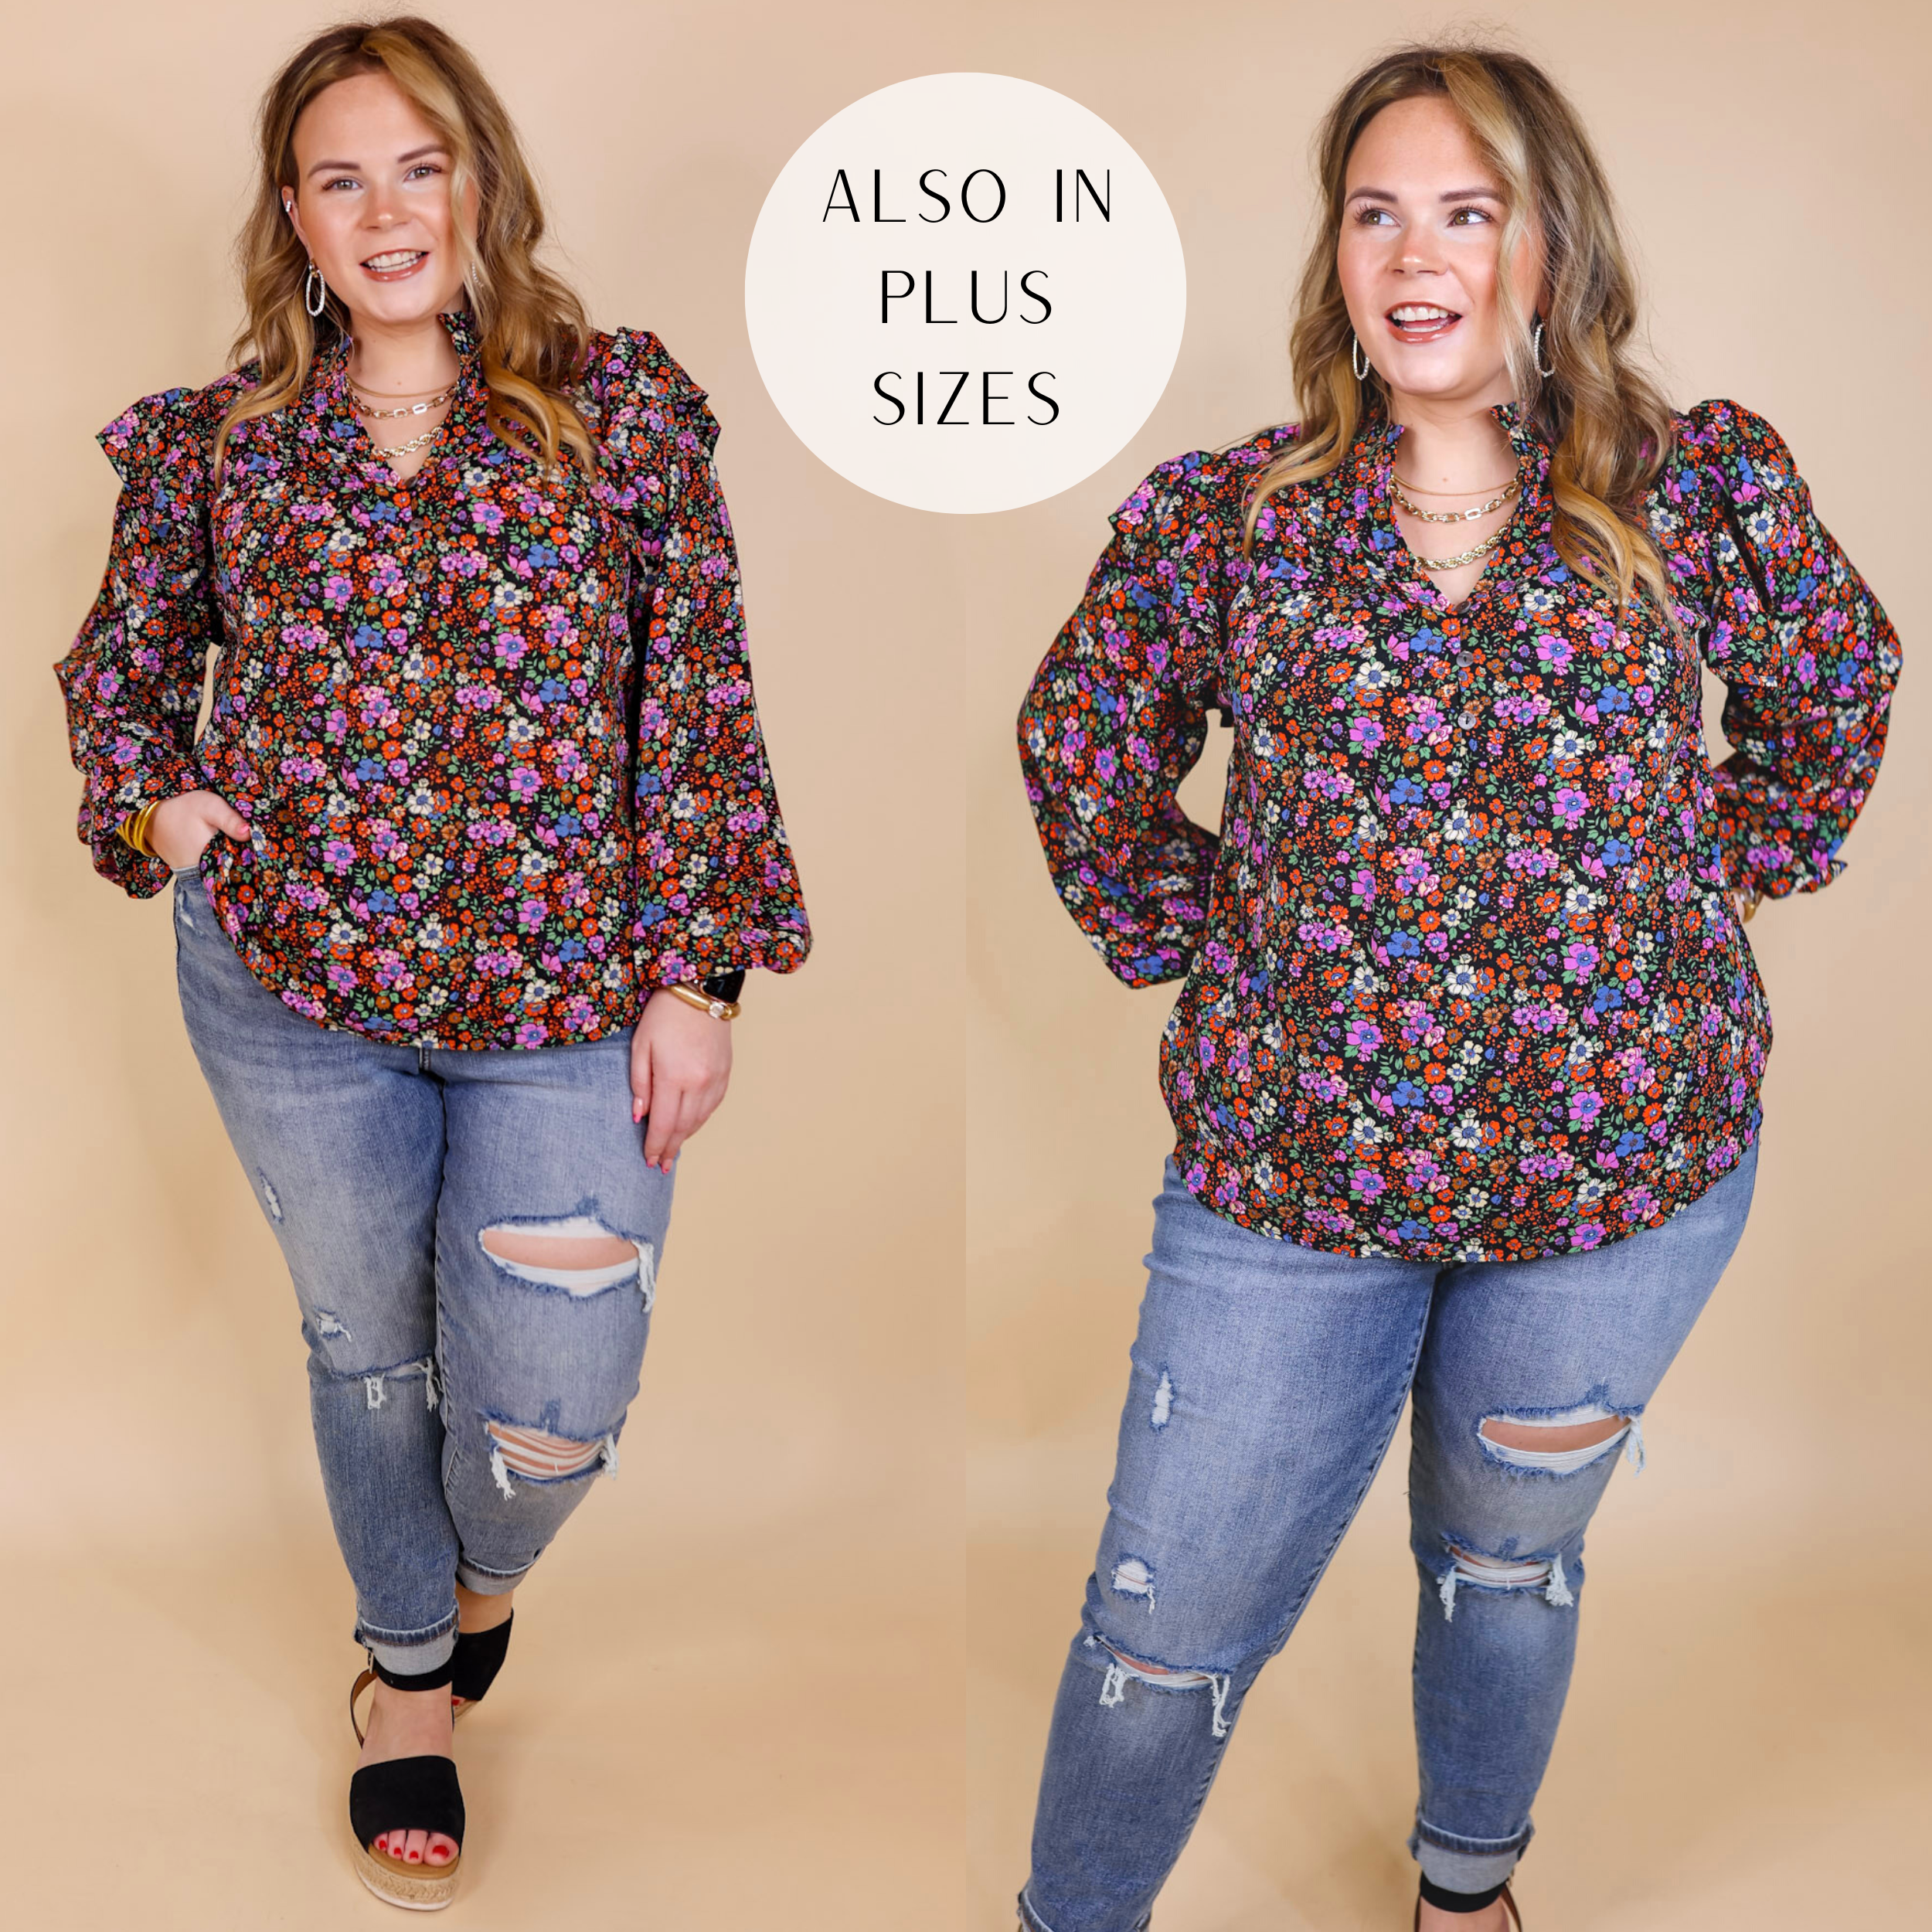 Model is wearing a black floral blouse with long sleeves and ruffles on the shoulder. Model has this top paired with black sandals, distressed skinny jeans, and gold jewelry.